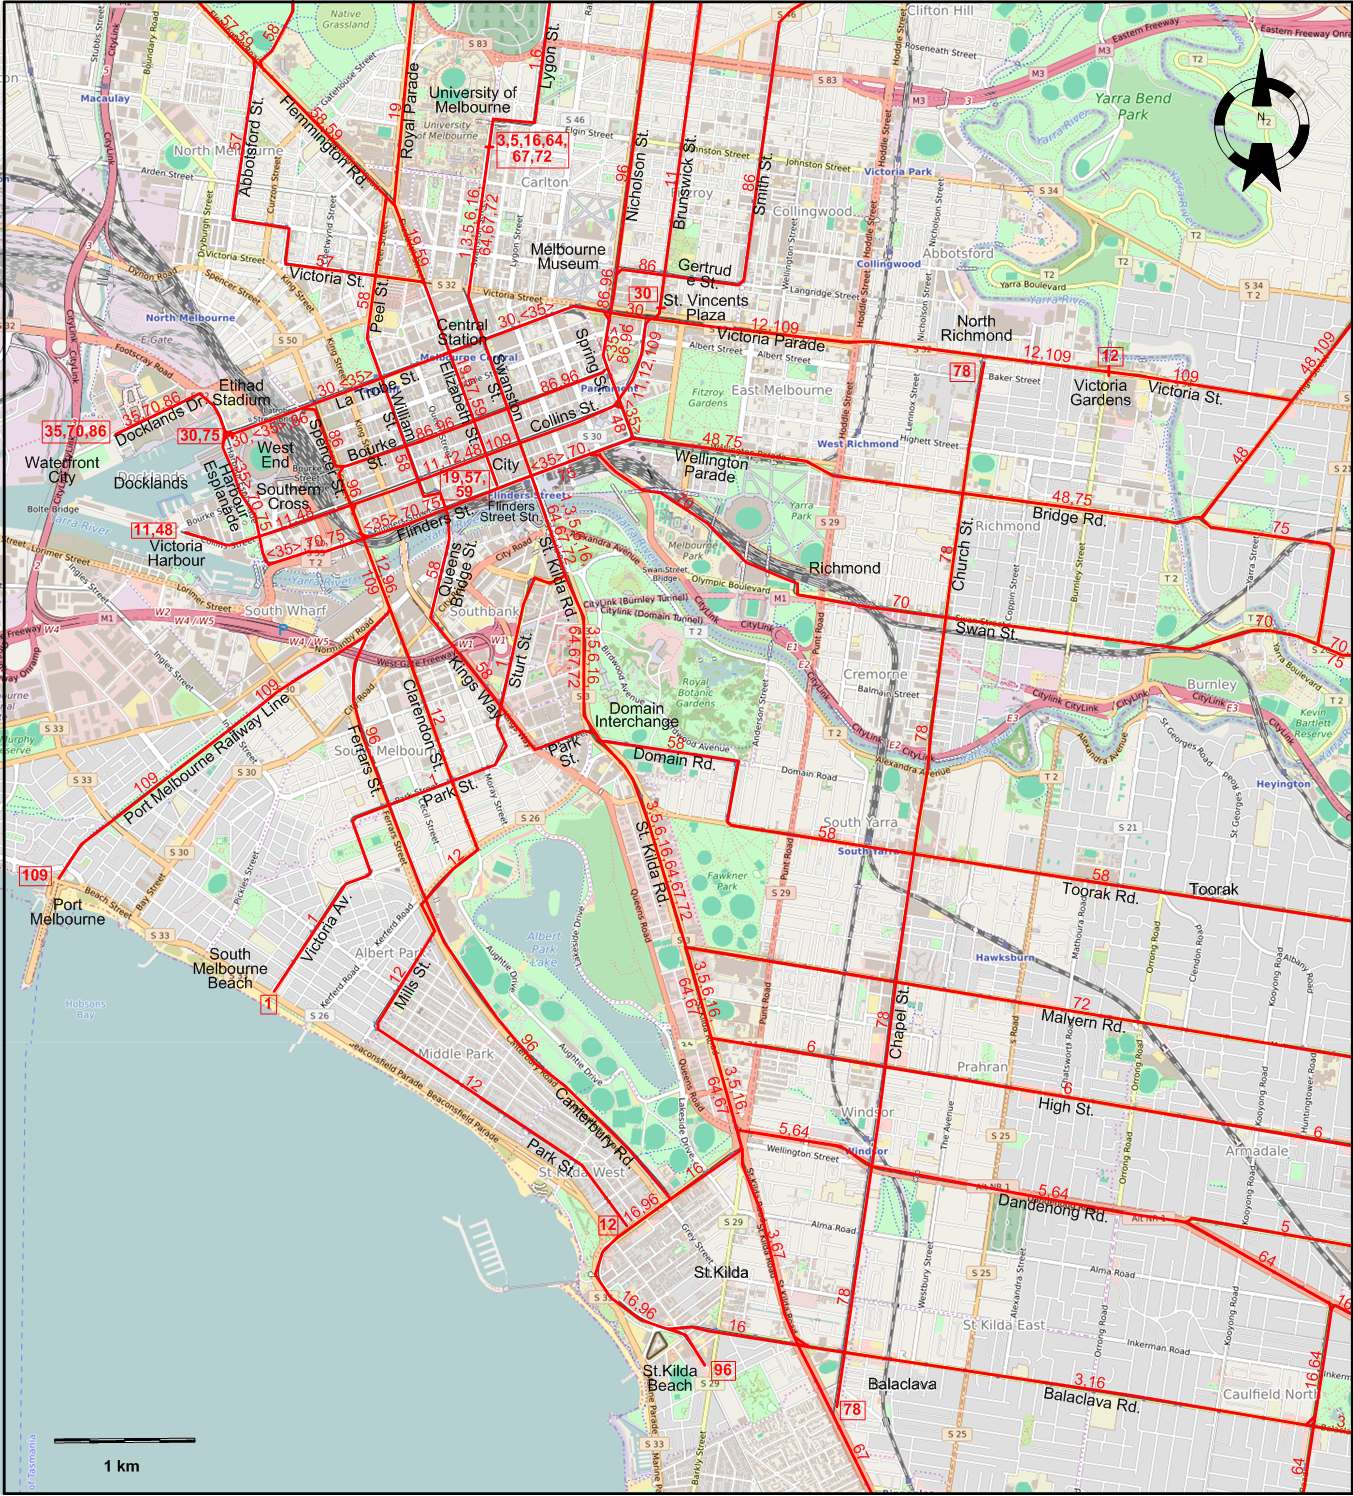 Melbourne-2017 downtown tram map